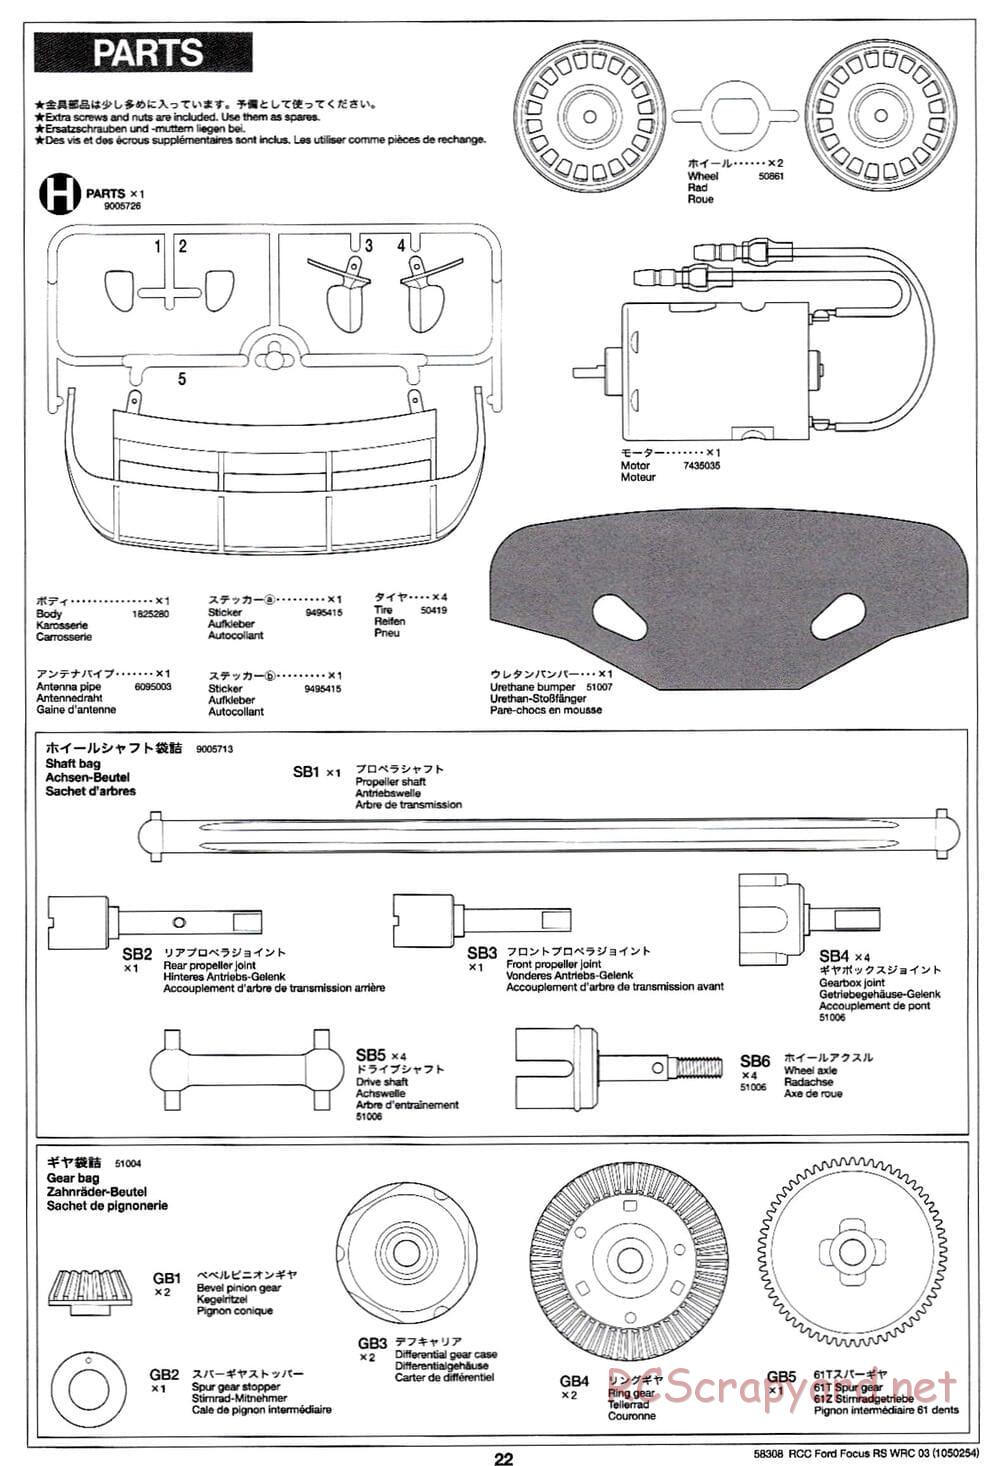 Tamiya - Ford Focus RS WRC 03 - TT-01 Chassis - Manual - Page 22